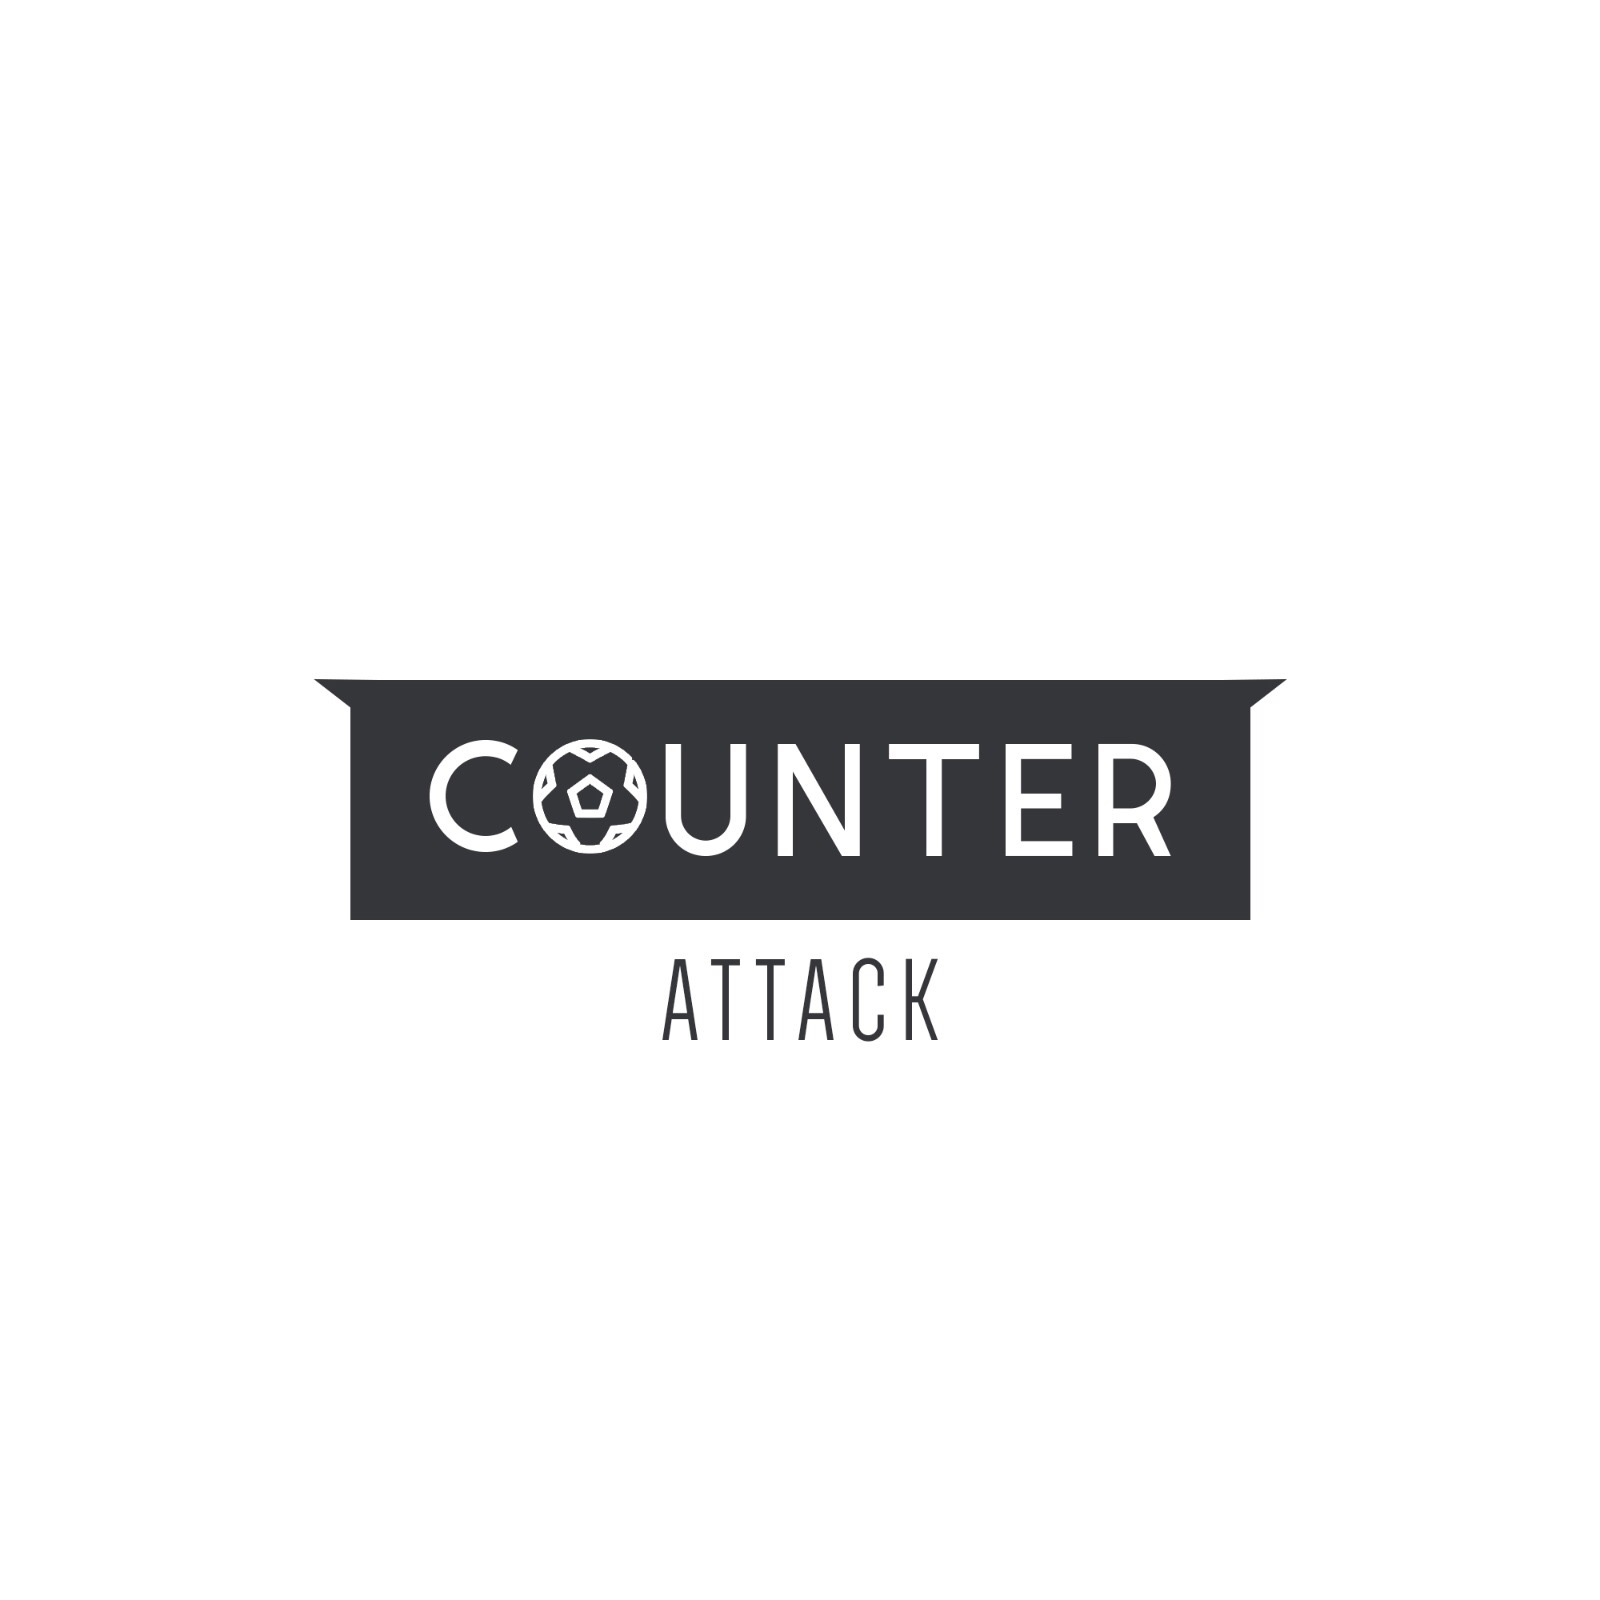 Counter Attack - Episode 45 - Alton Thelwell Drops Names